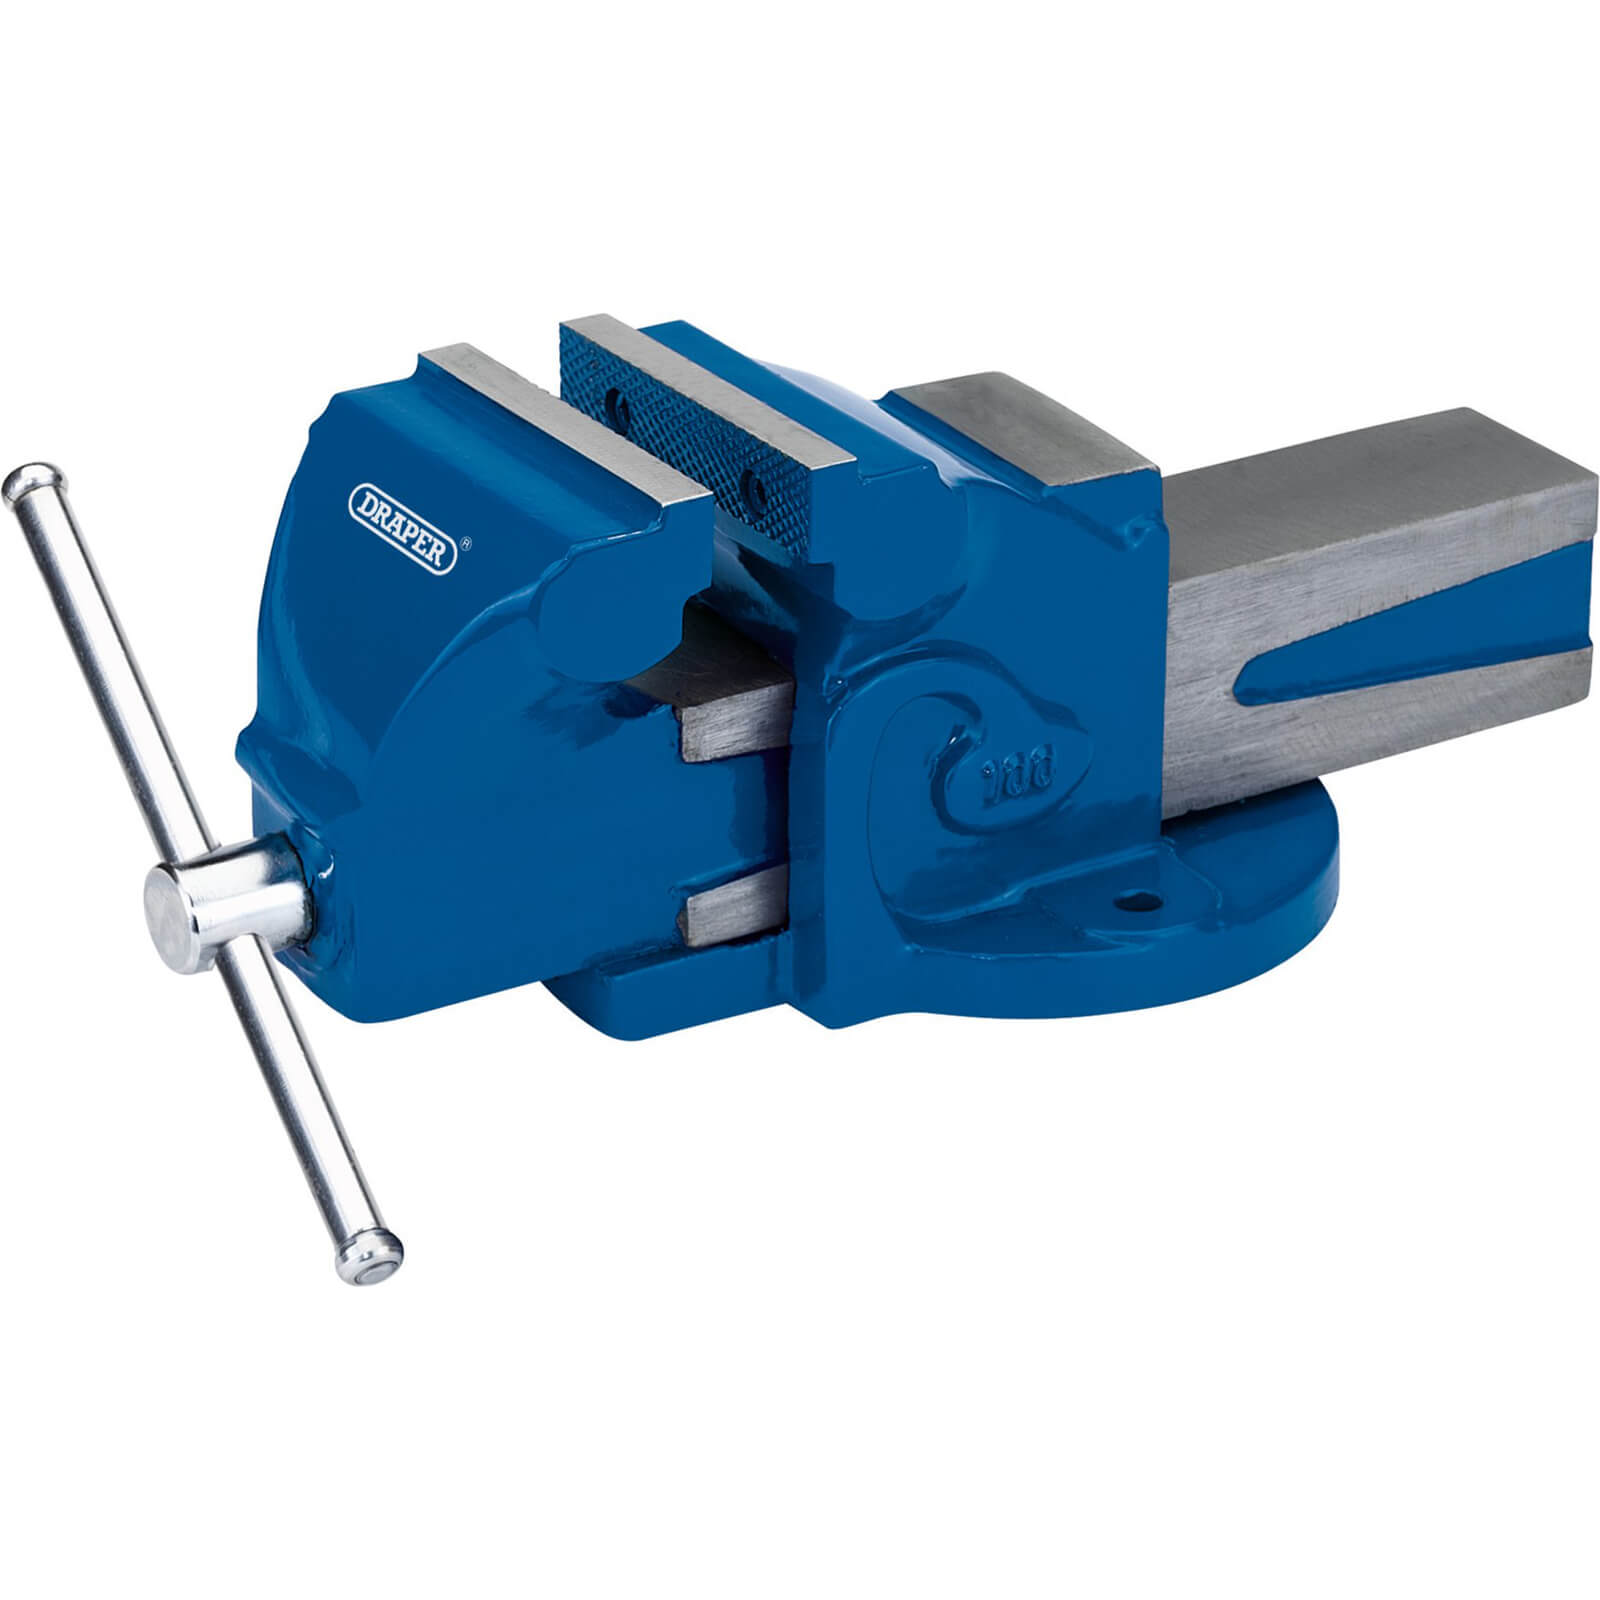 Image of Draper Engineers Bench Vice 100mm